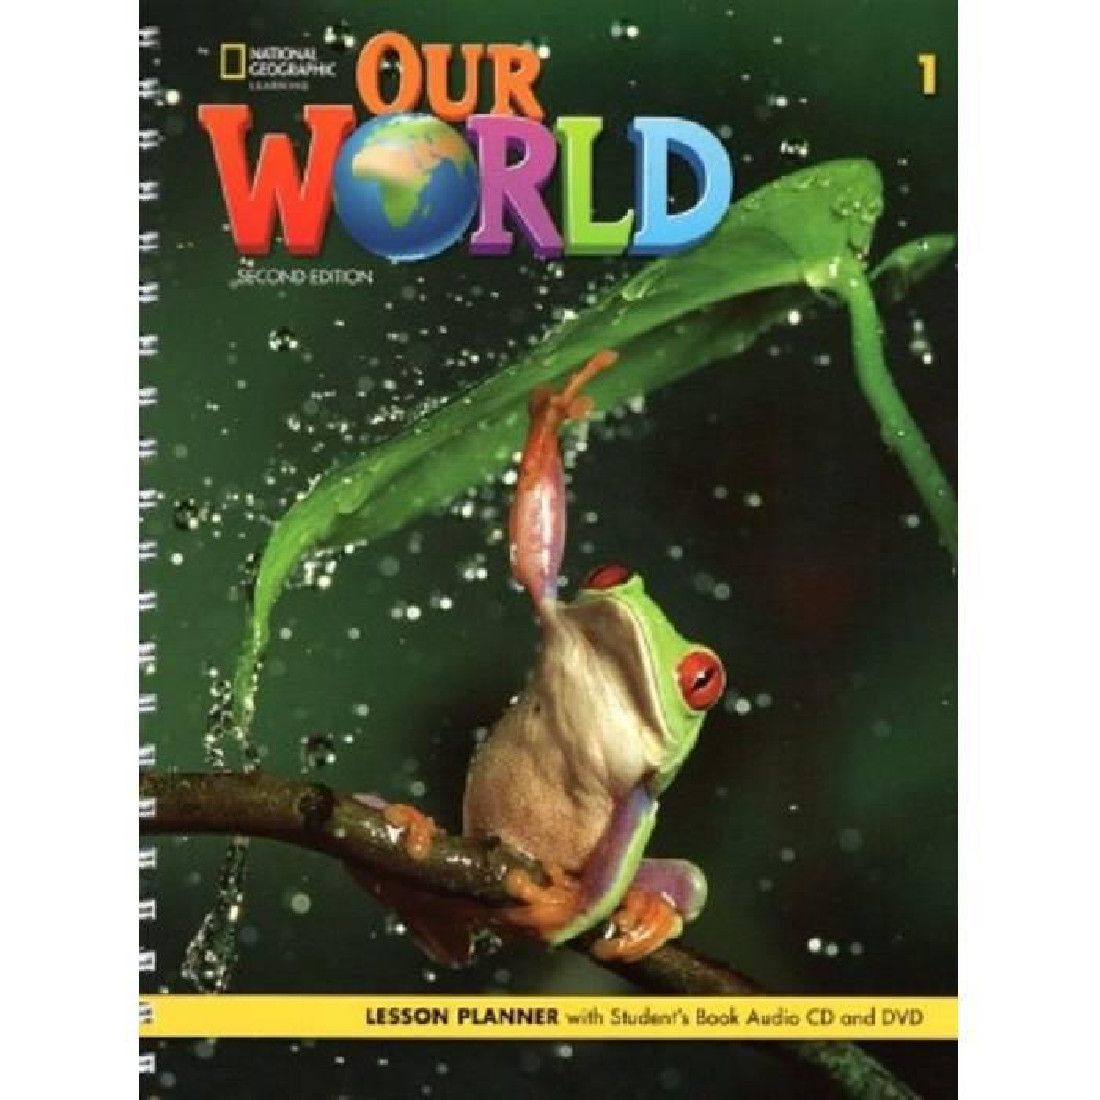 WELCOME TO OUR WORLD 1 SB LESSON PLANNER (+ AUDIO CD + CD-ROM & DVD) - AMER. ED 2ND ED